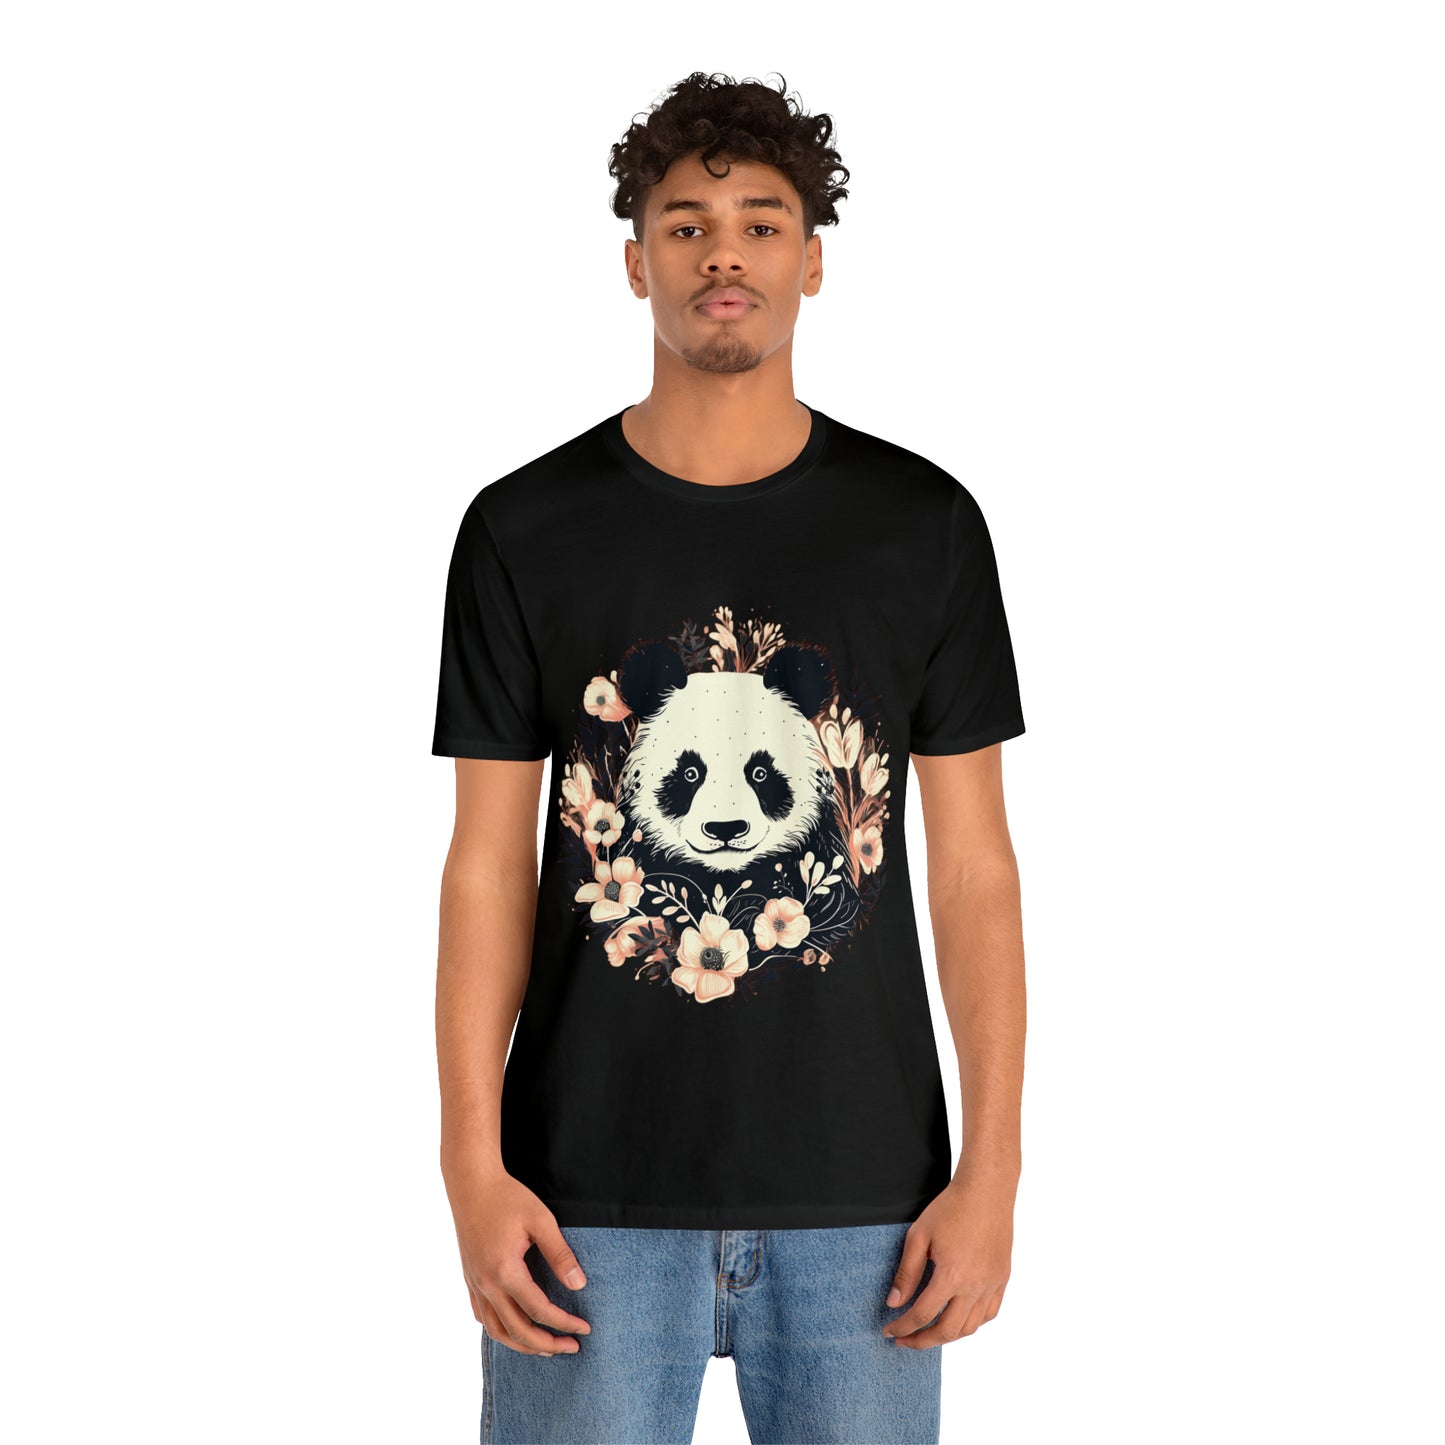 Panda Tee with Floral Background